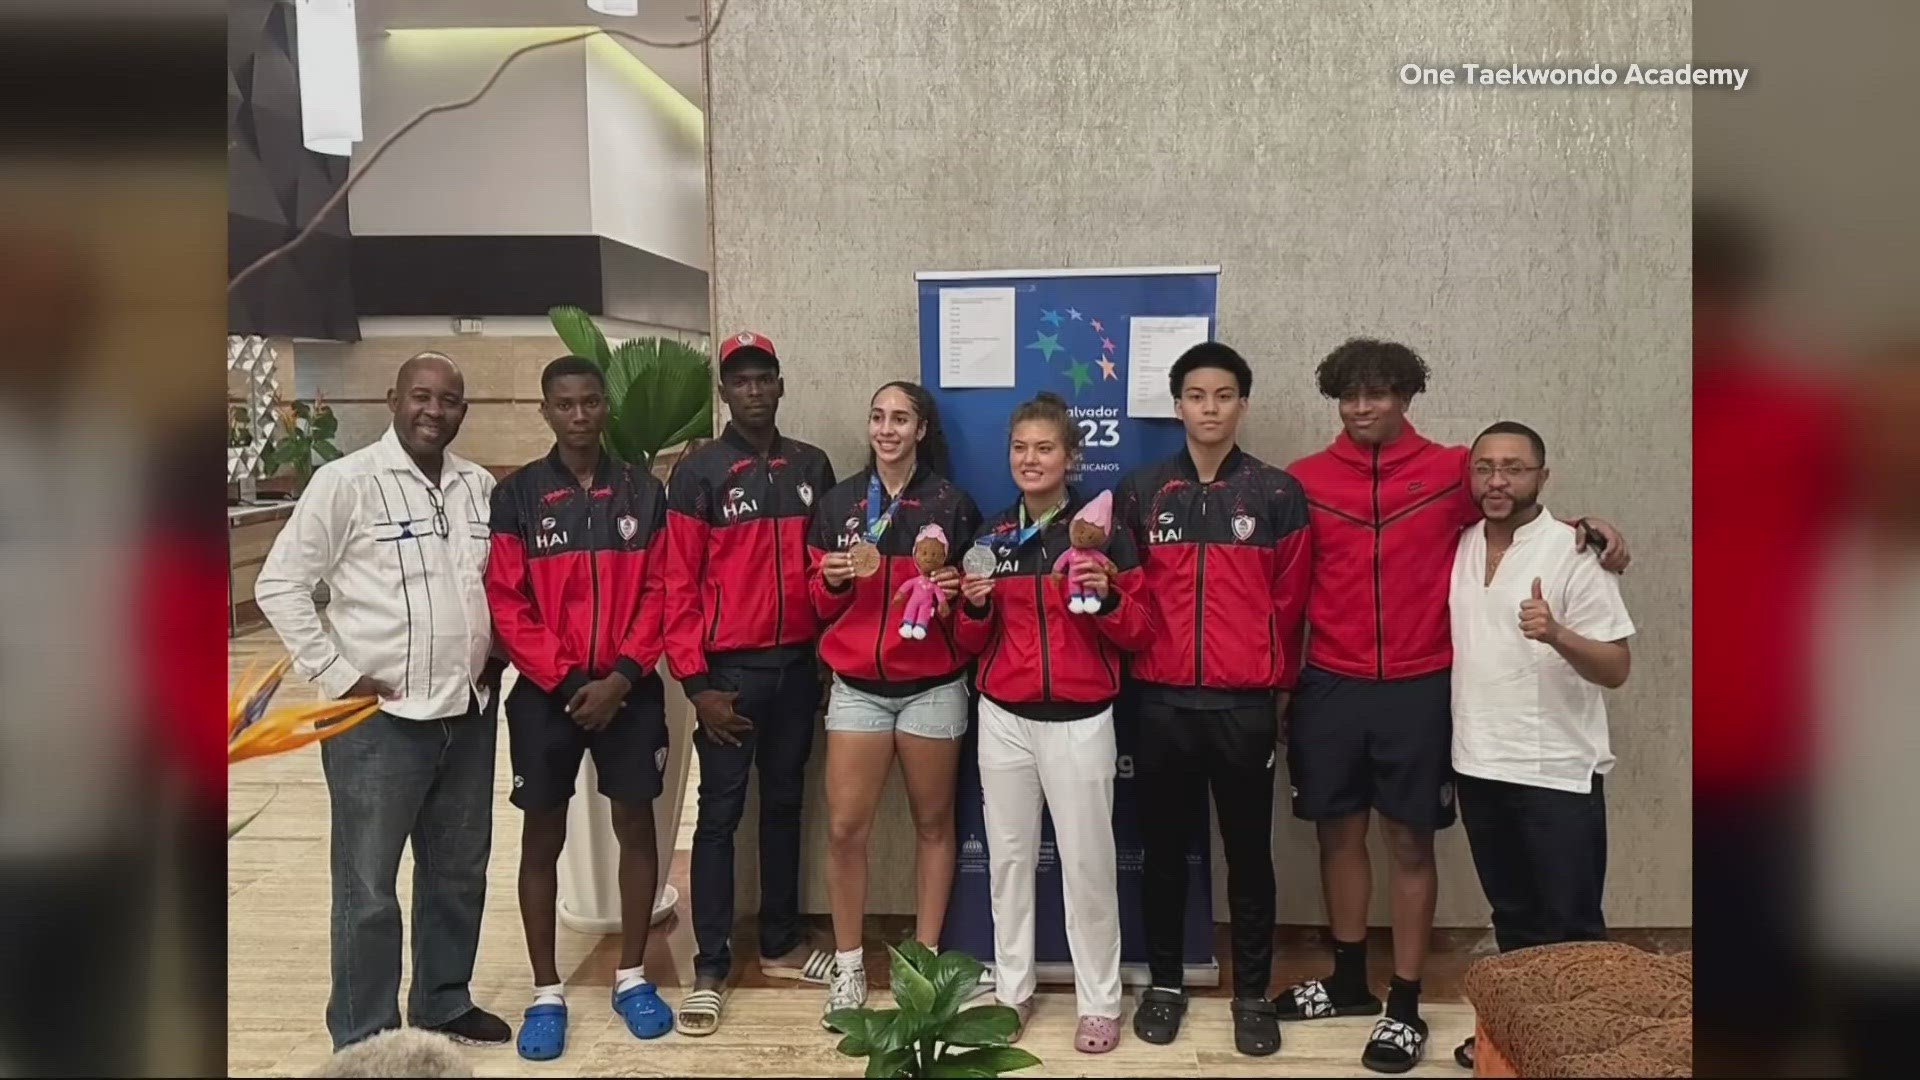 The students will be competing at the Para-Taekwondo Pan American Qualification Tournament in the Dominican Republic on April 9 and 10.